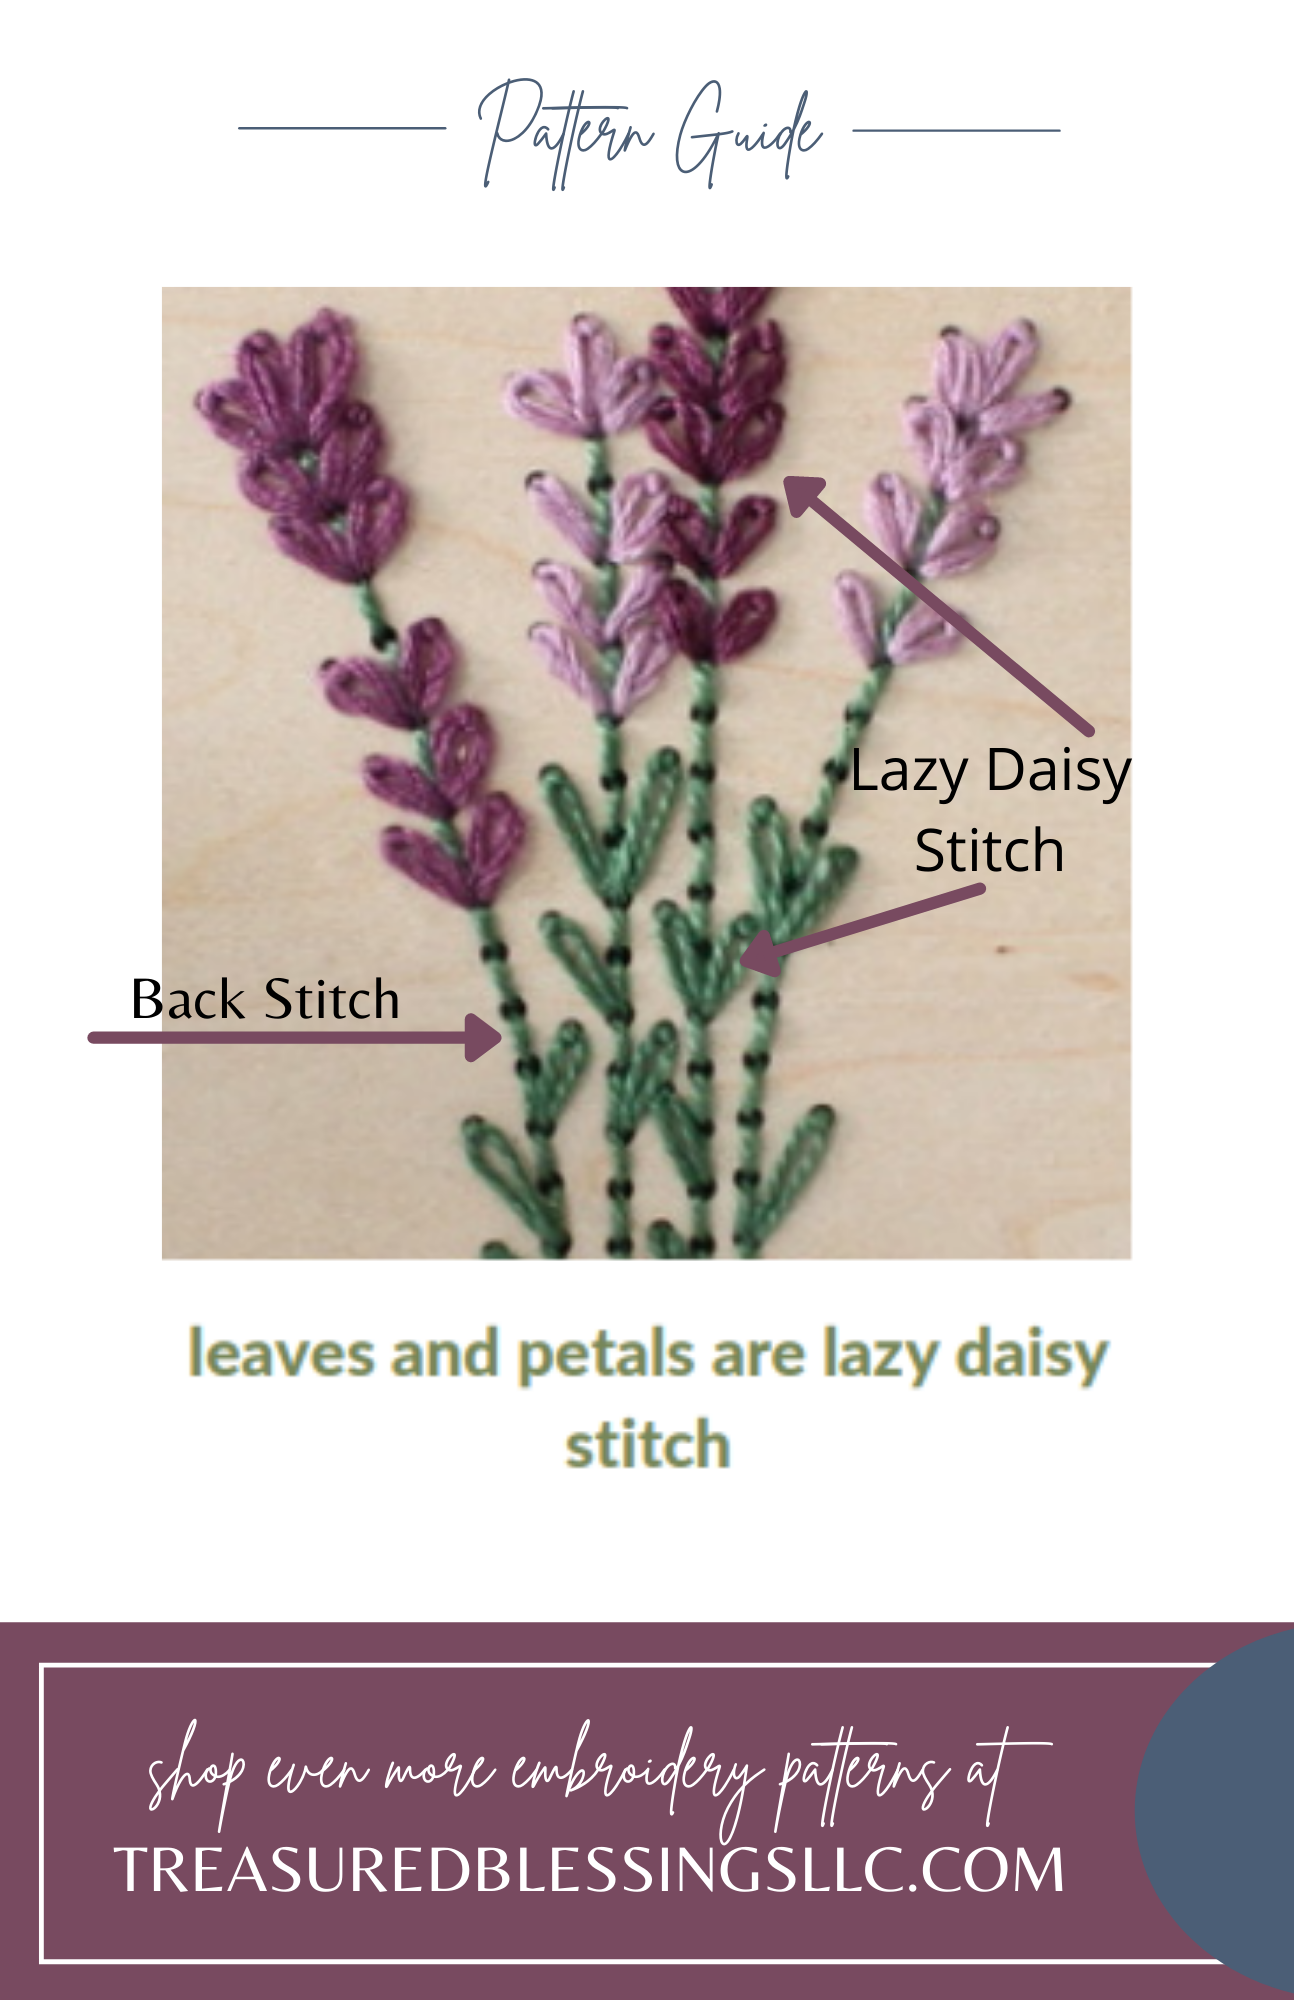 Wood Embroidery Kit - Lavender